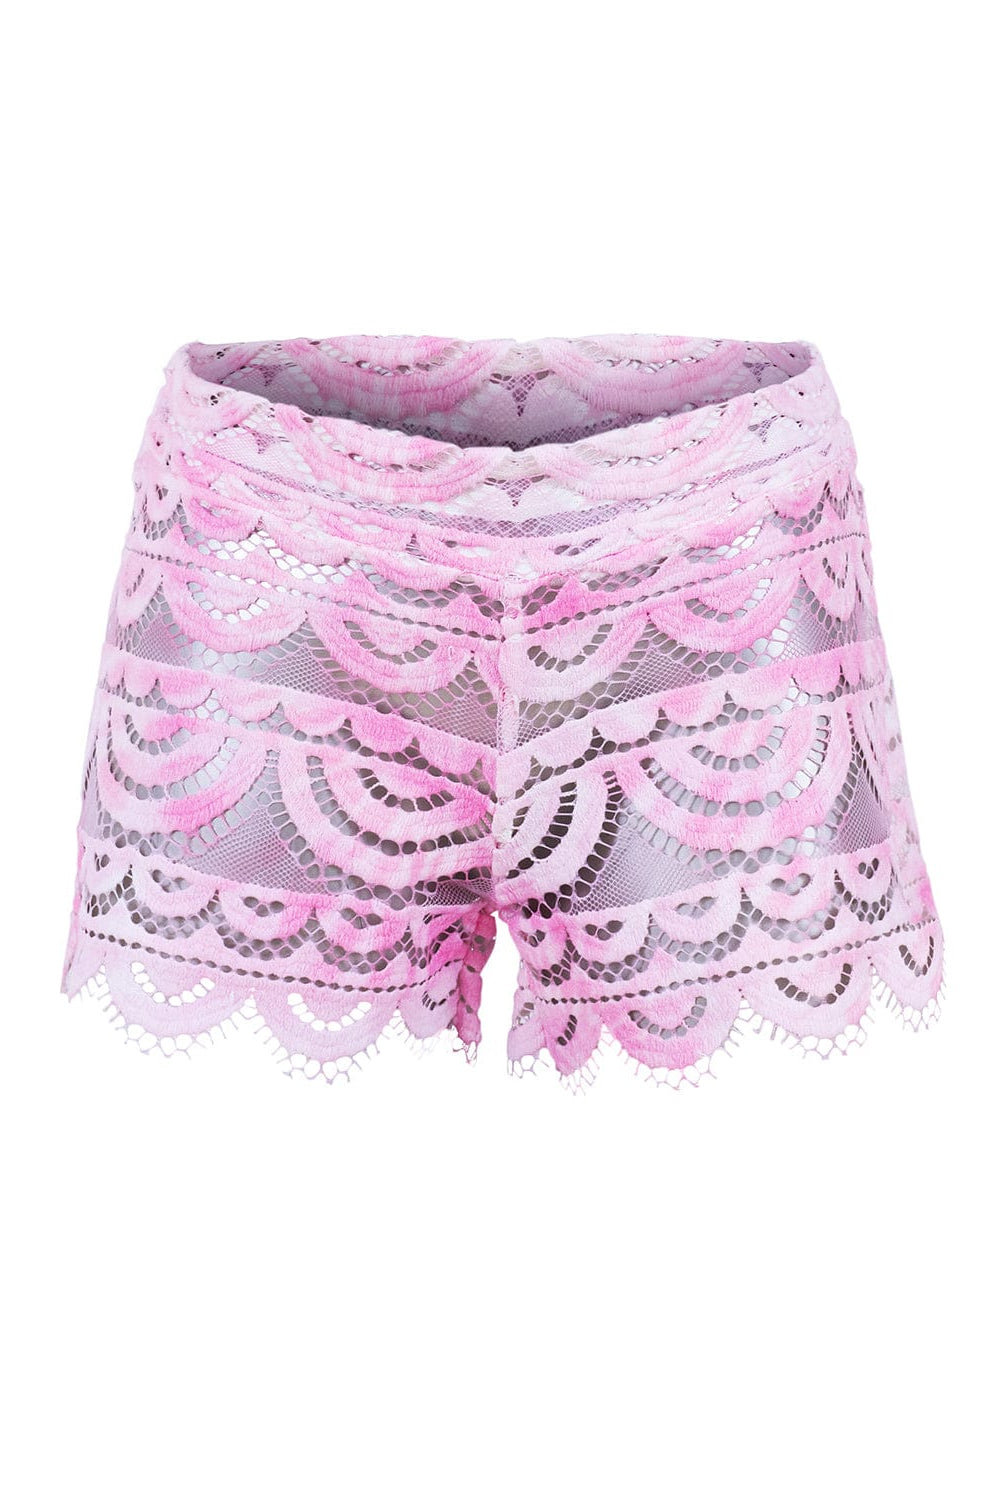 Pink lace shorts against a white wall. 